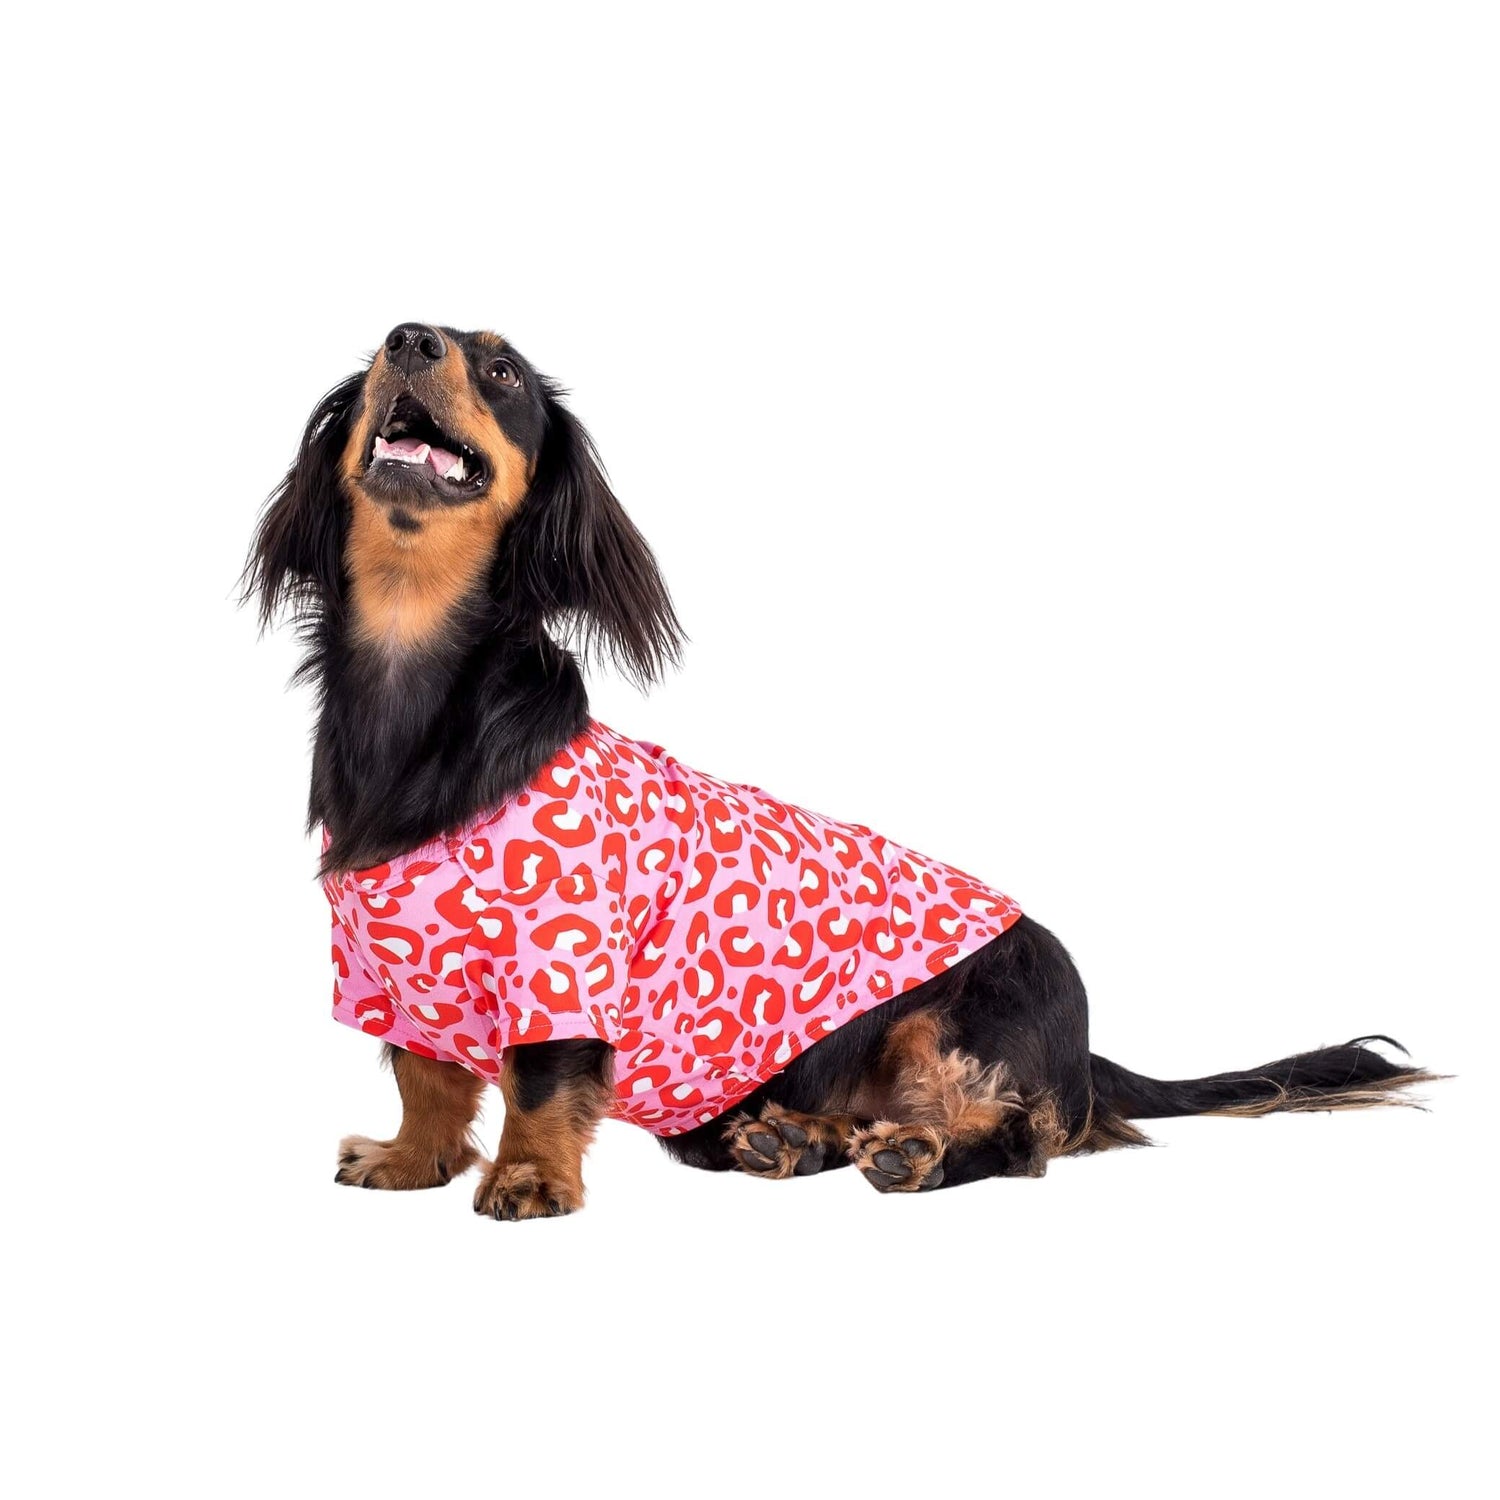 Ellie the dachshund wearing Vibrant Hounds Fierve in Pink dog shirt. The shirt is a red and pink leopard print.